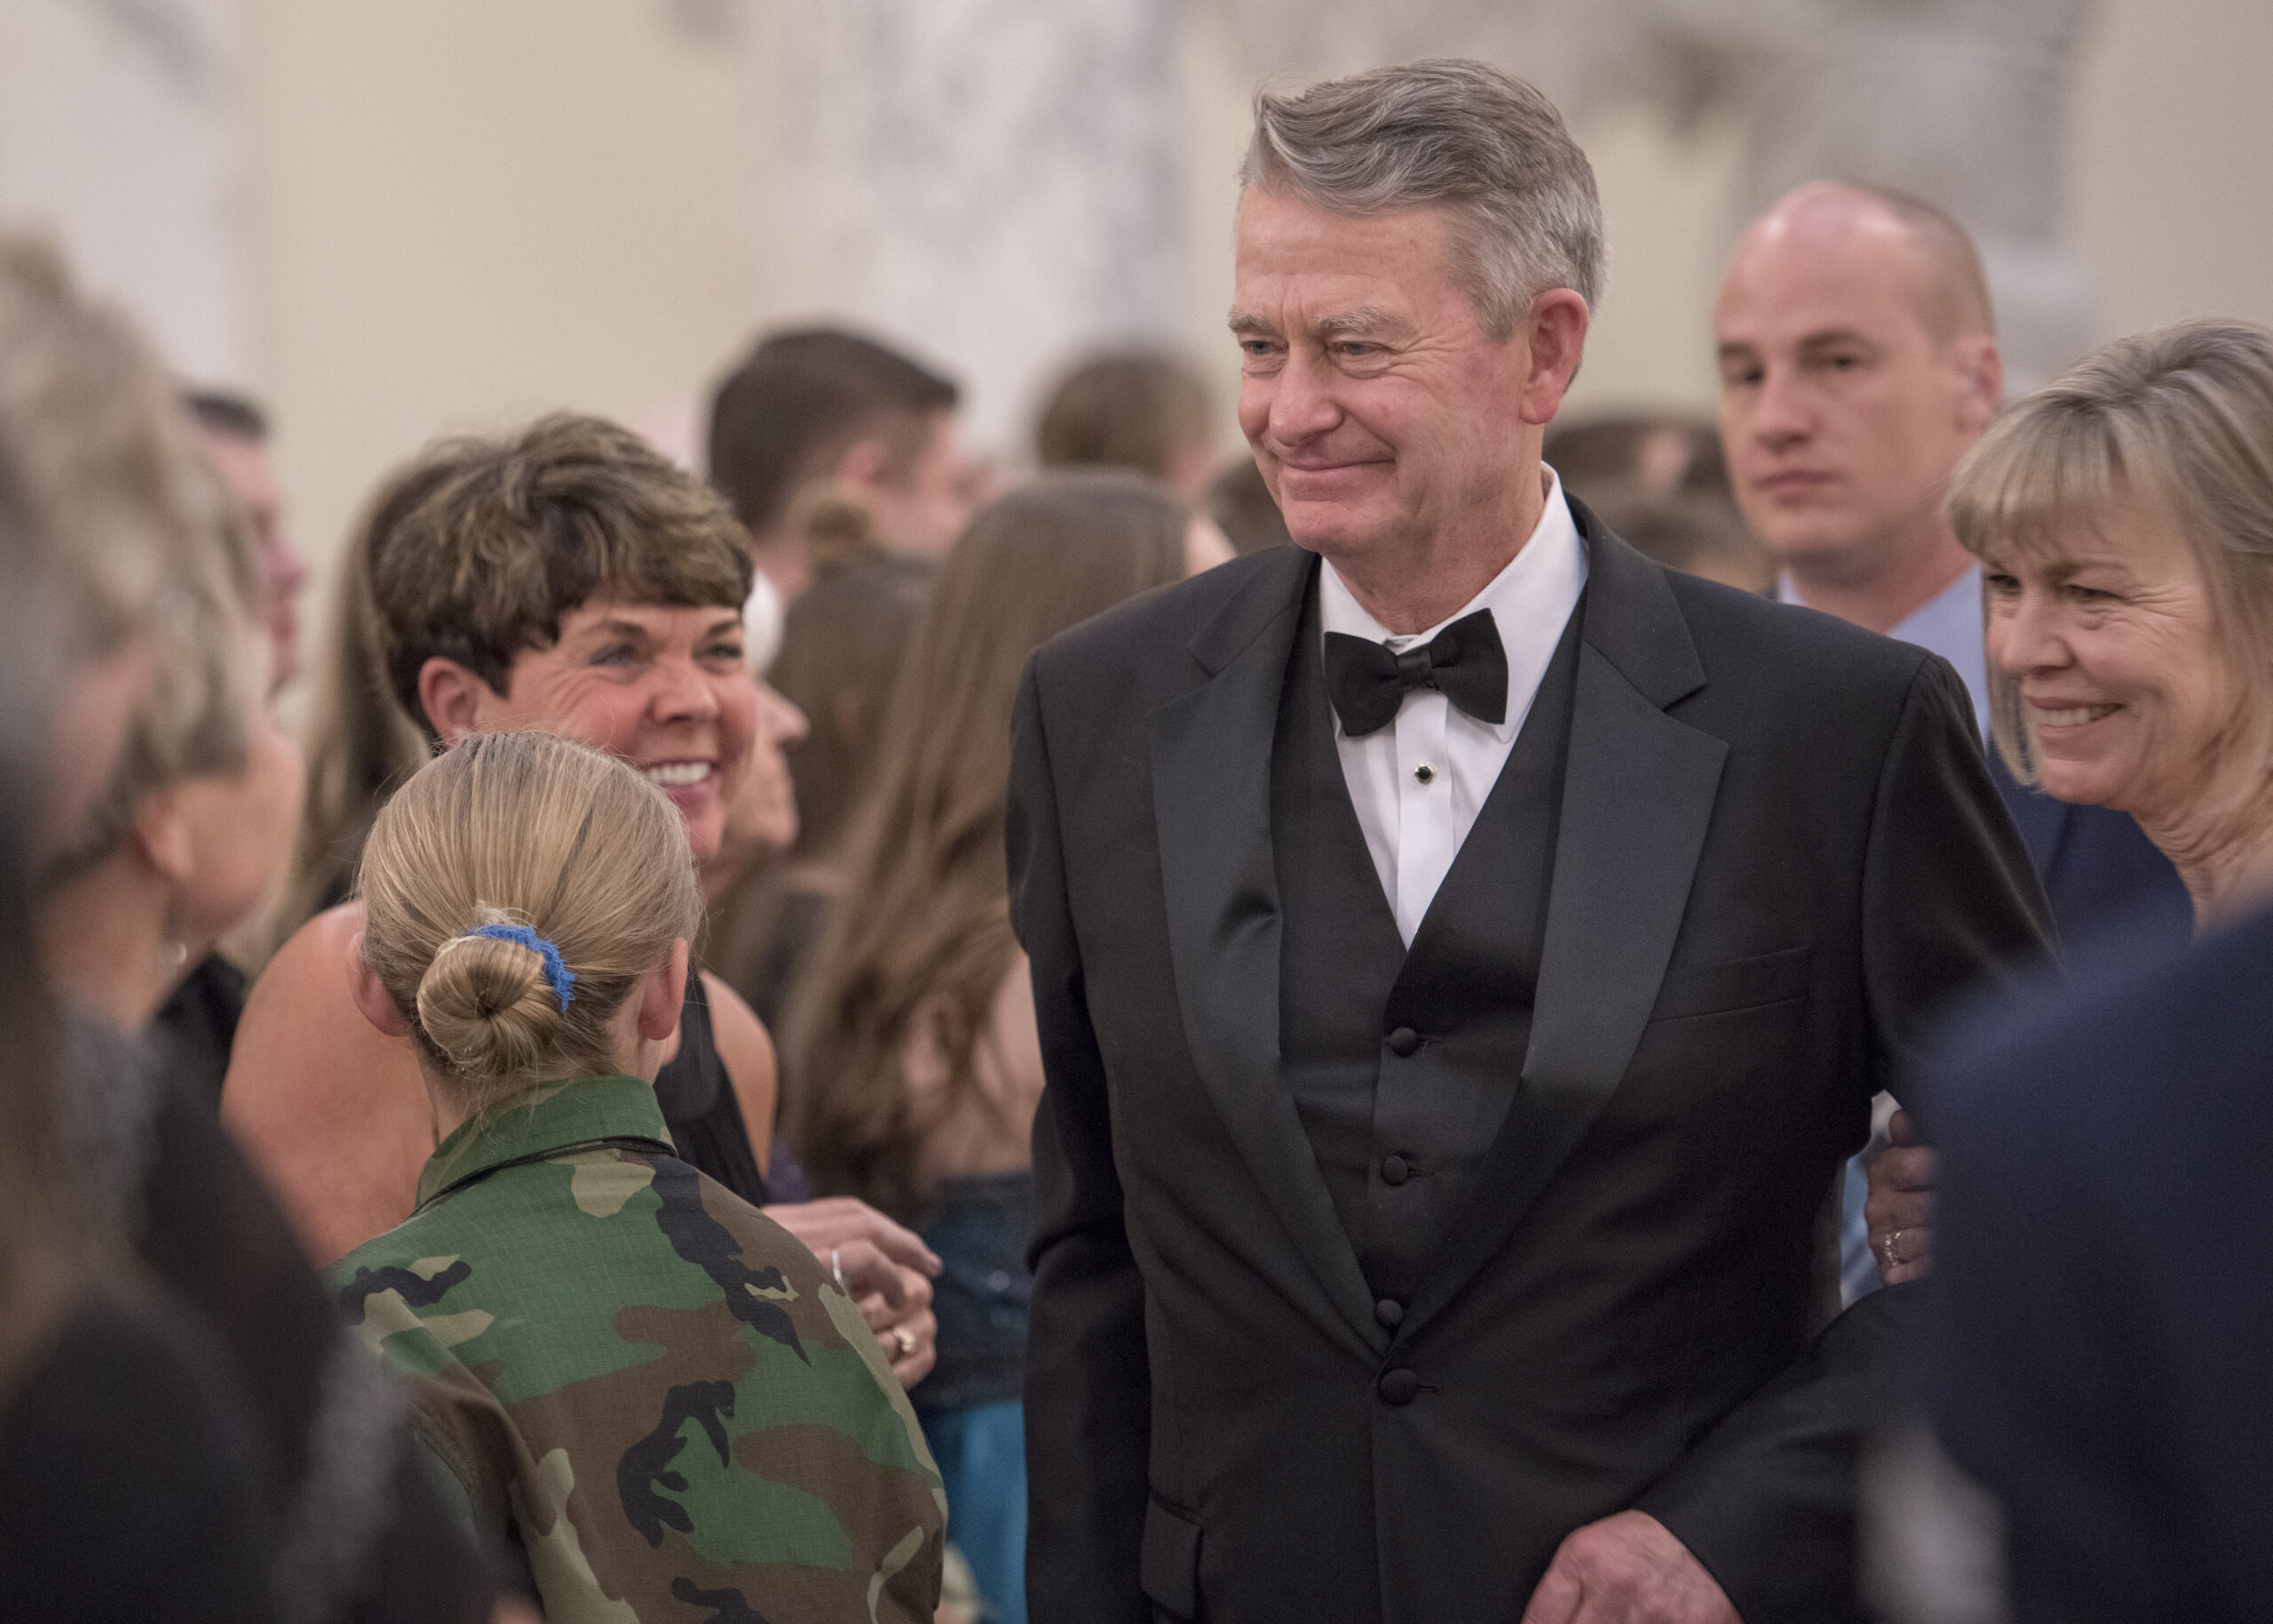 Governor Brad Little at 2019 Inaugural Ball